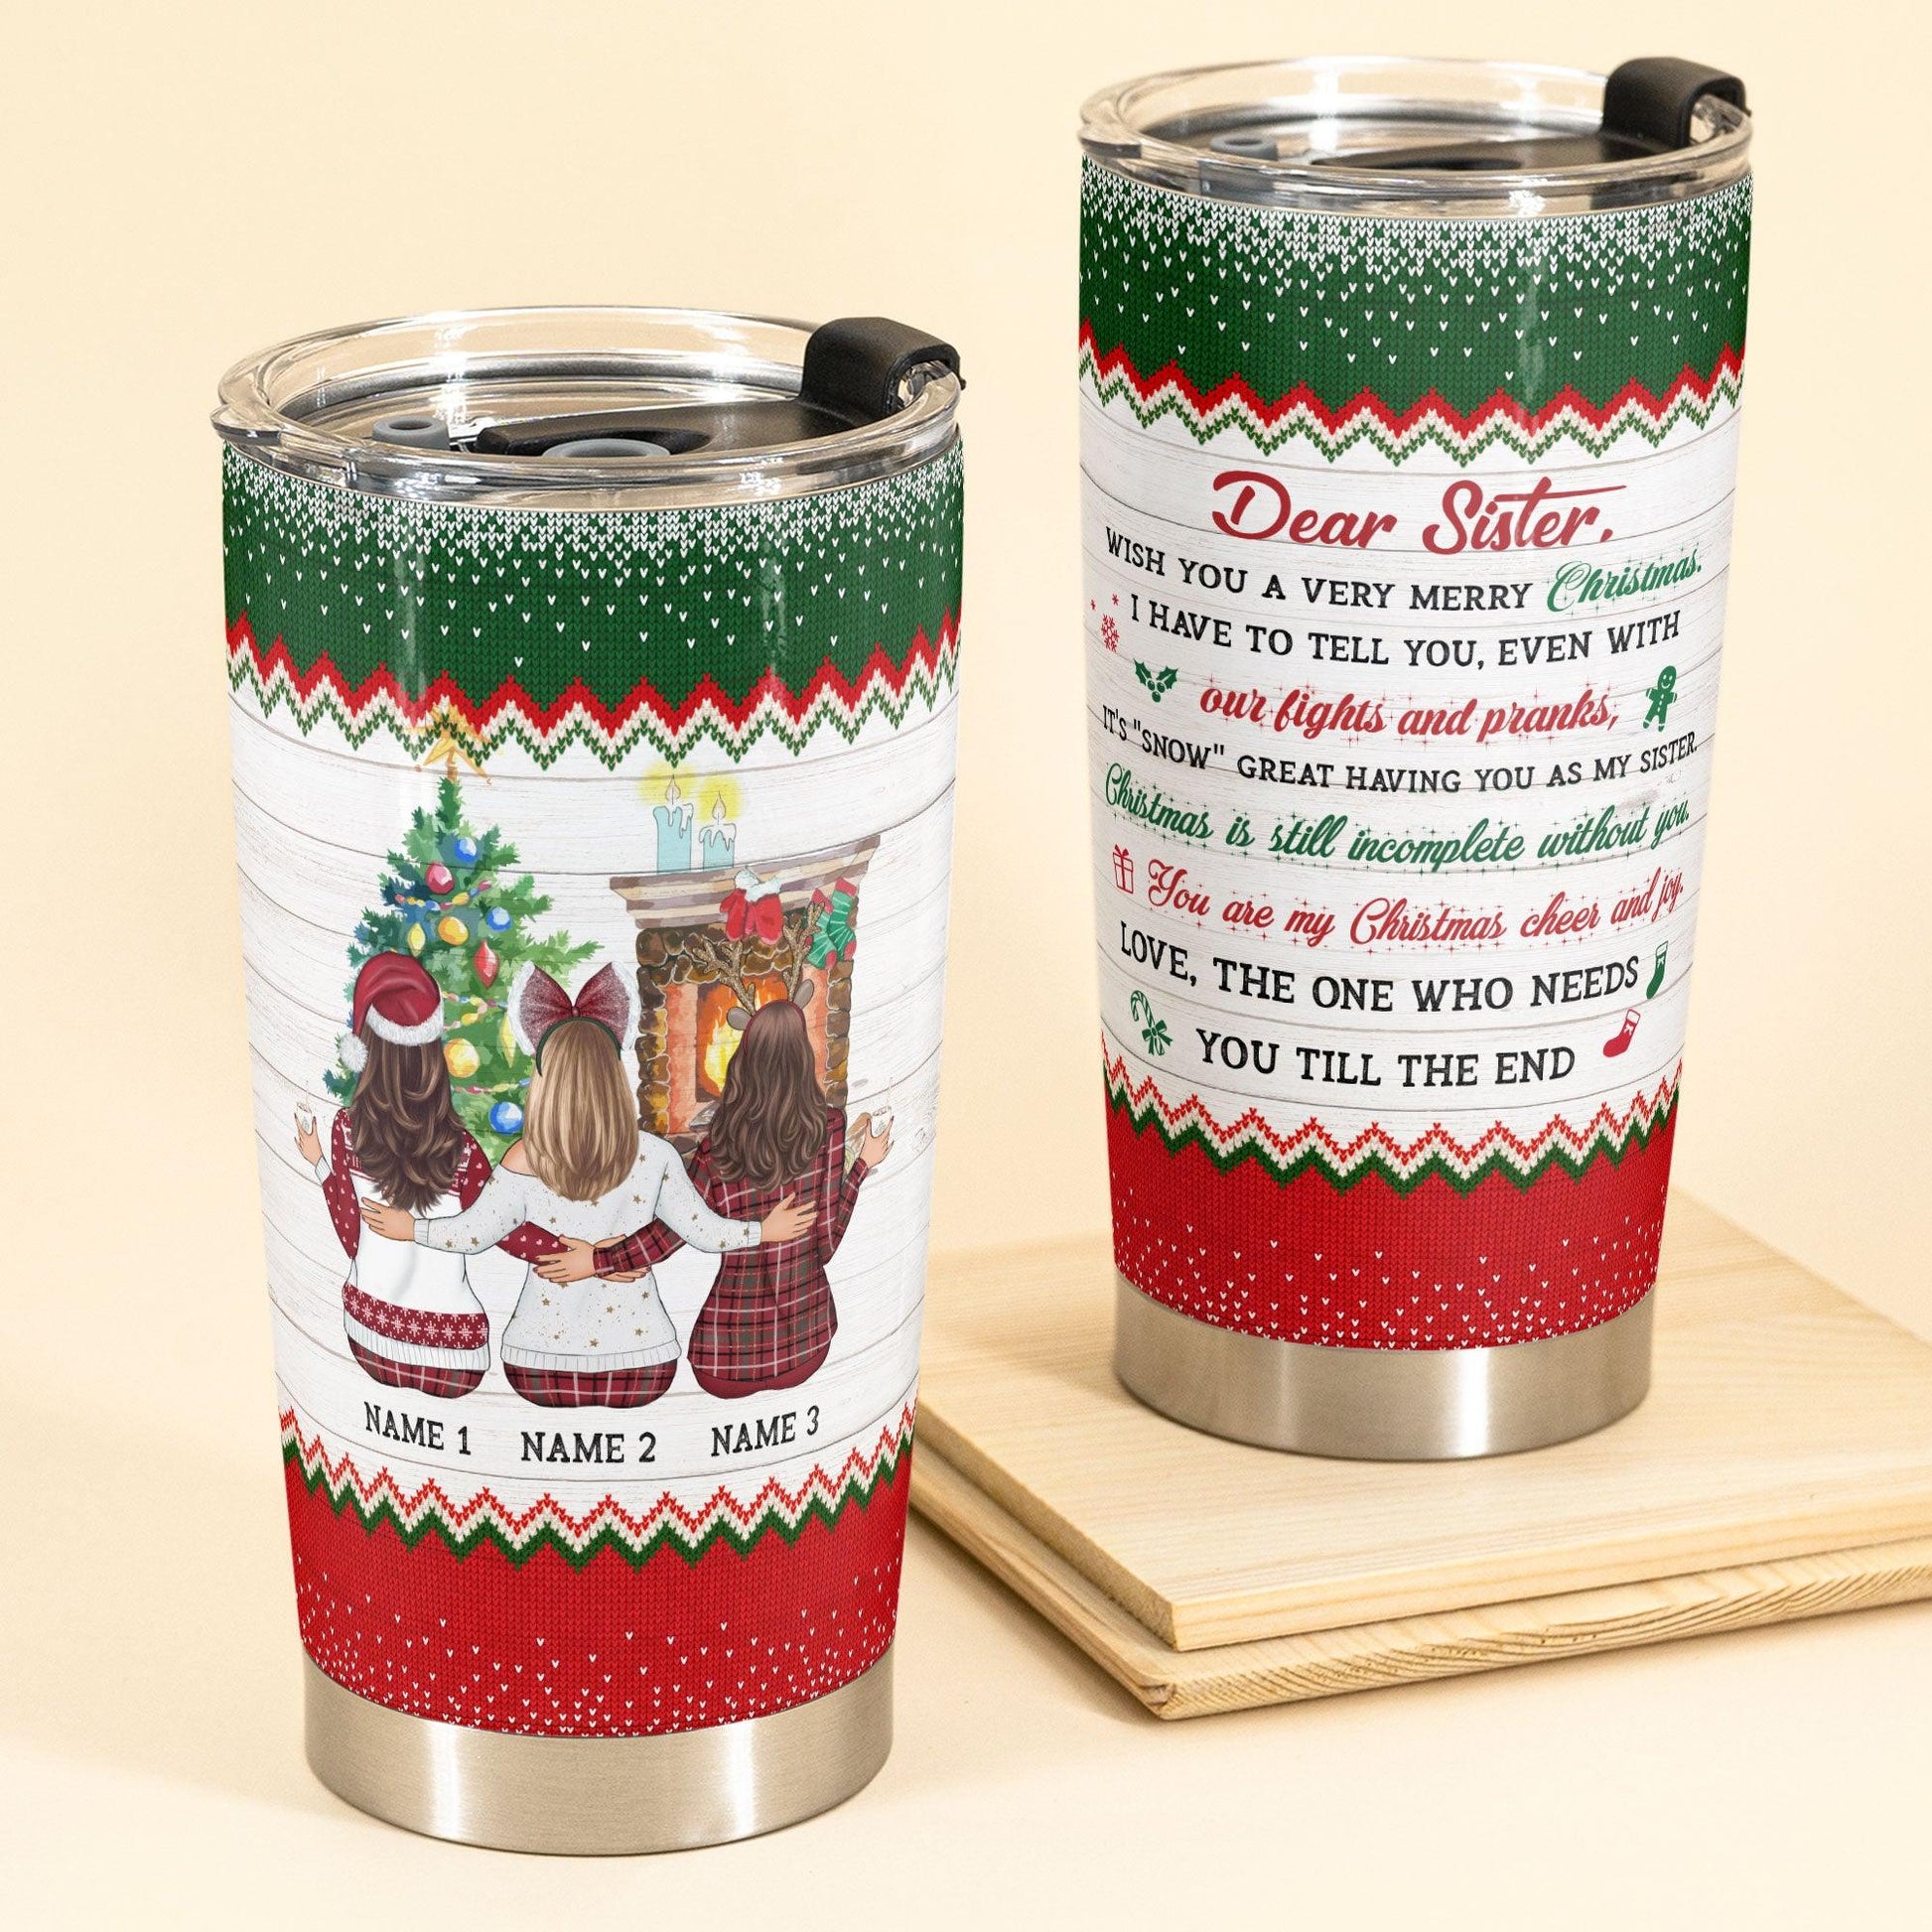 "Snow" Great Having You - Personalized Tumbler Cup - Christmas Gift For Sisters - Macorner